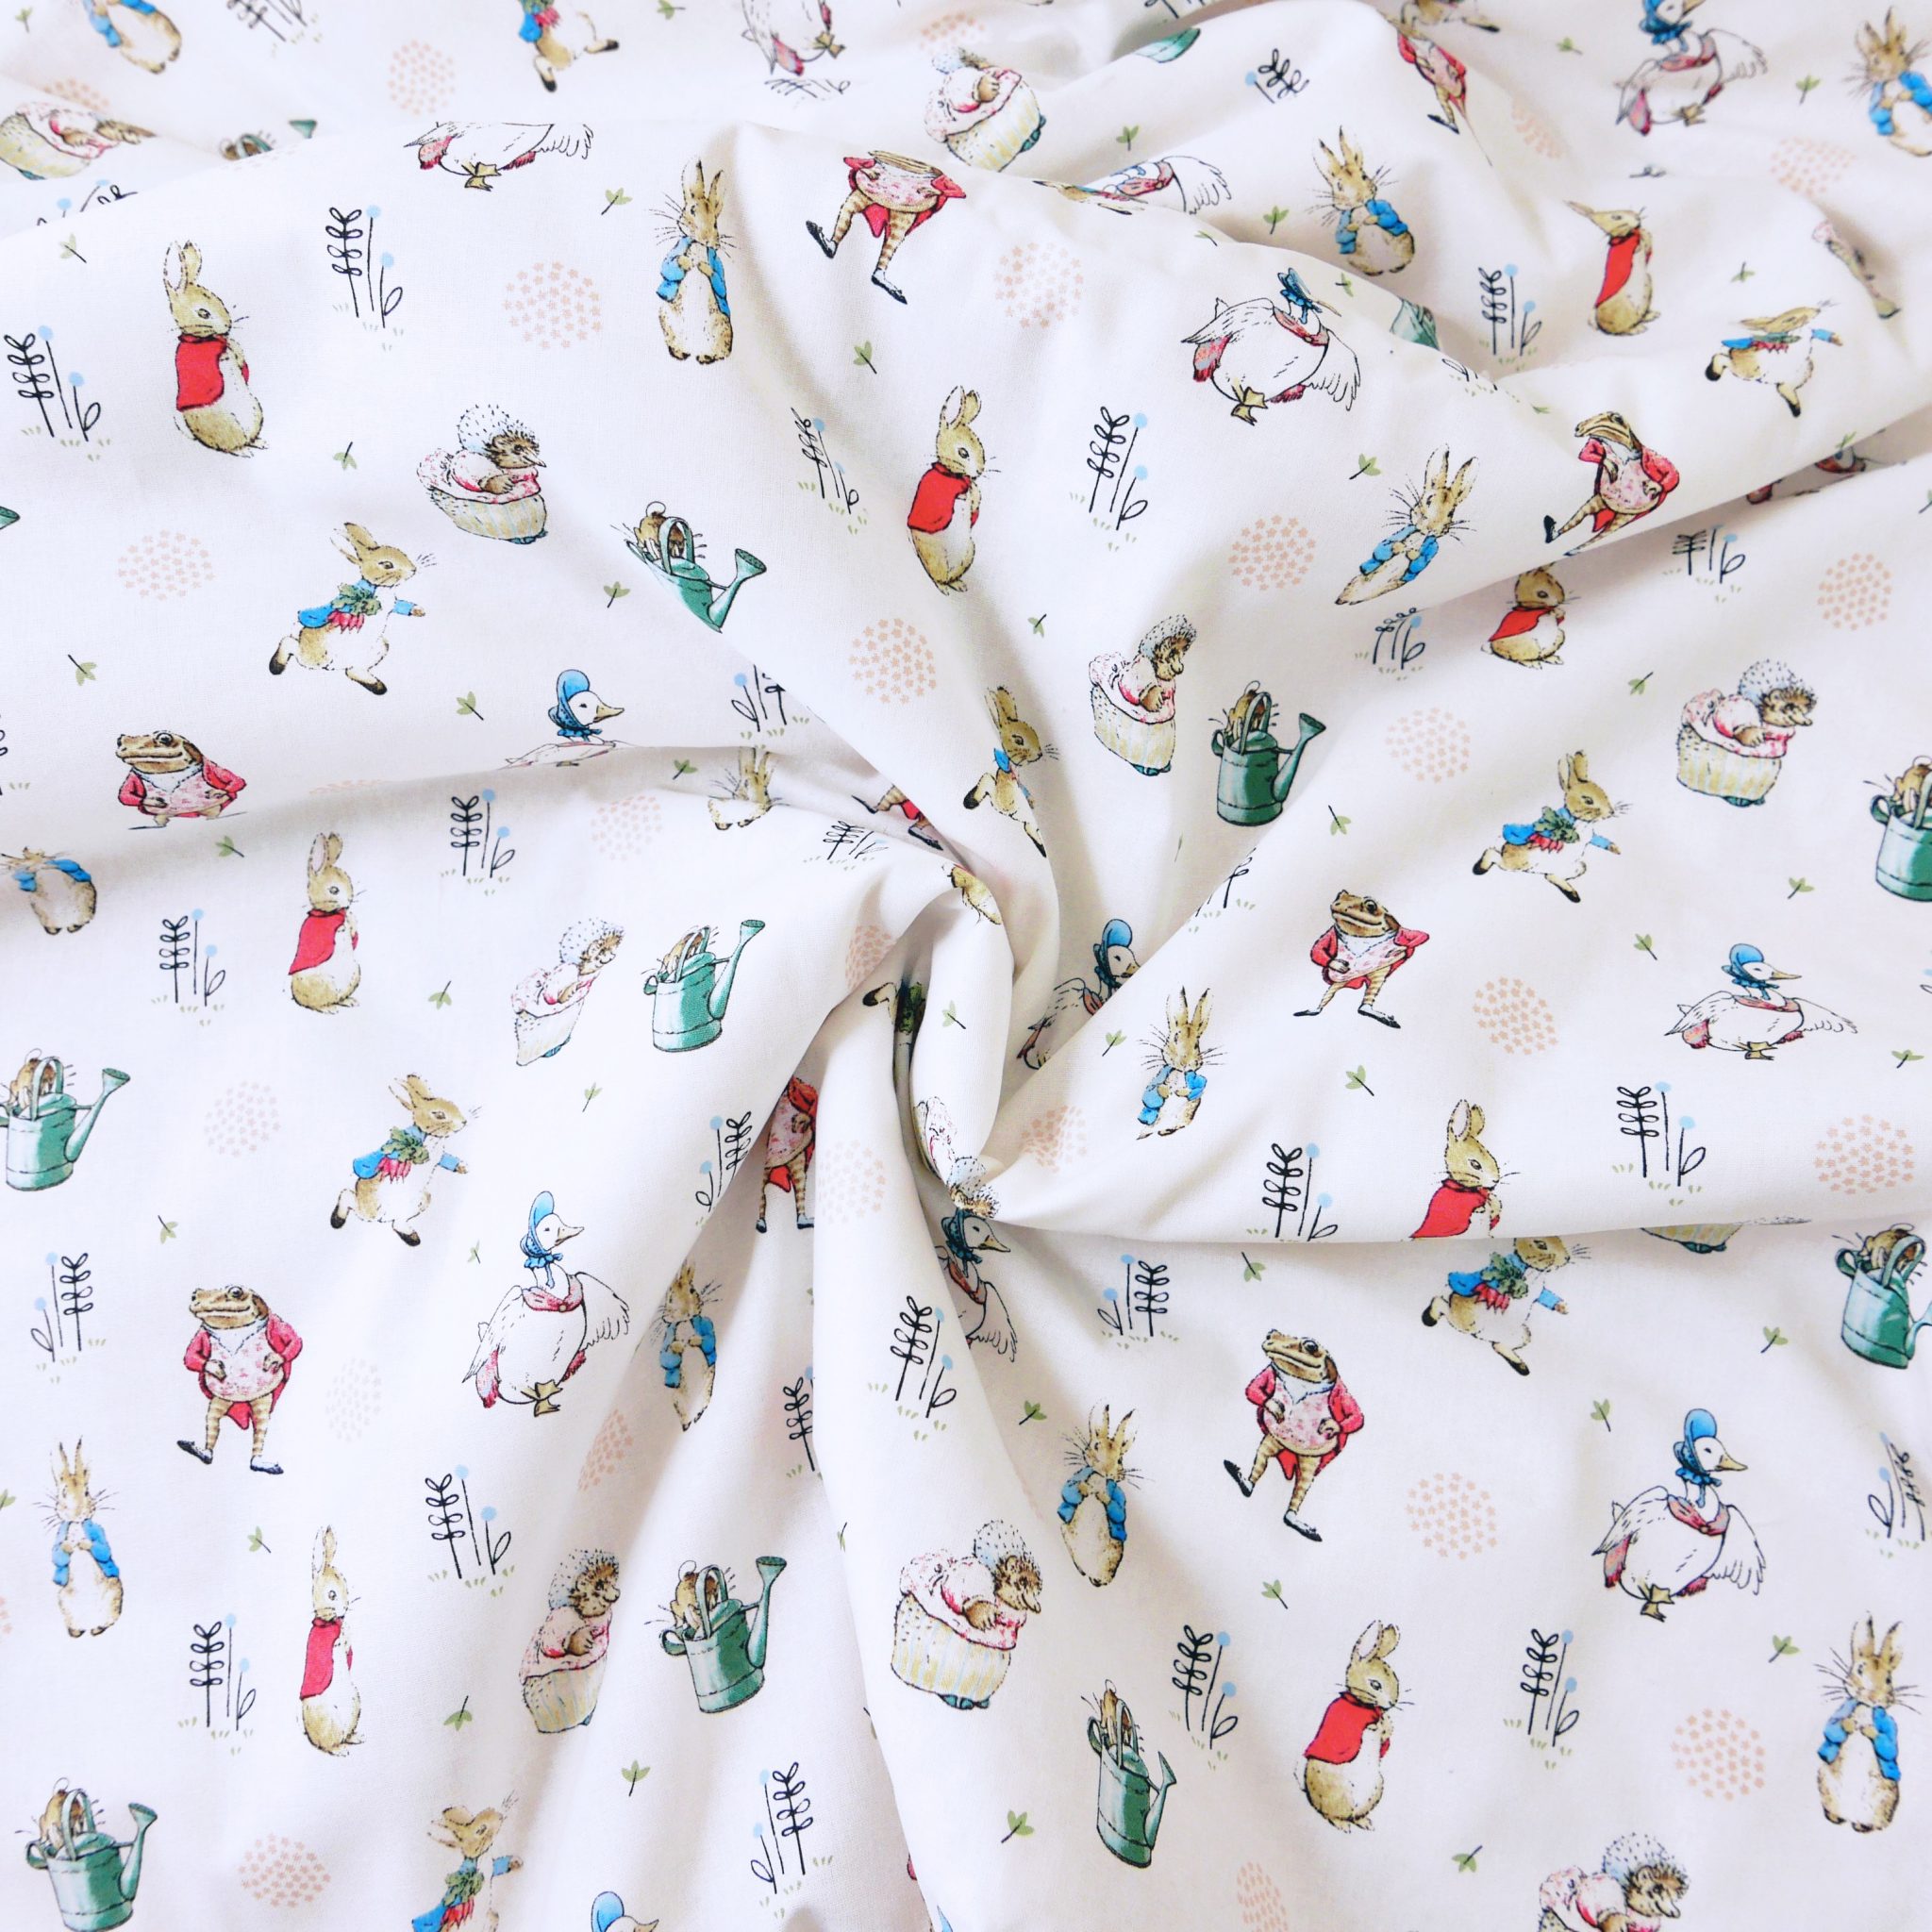 Peter Rabbit & Friends Beatrix Potter Cot Bed Blanket by Calico Clouds Calico Clouds